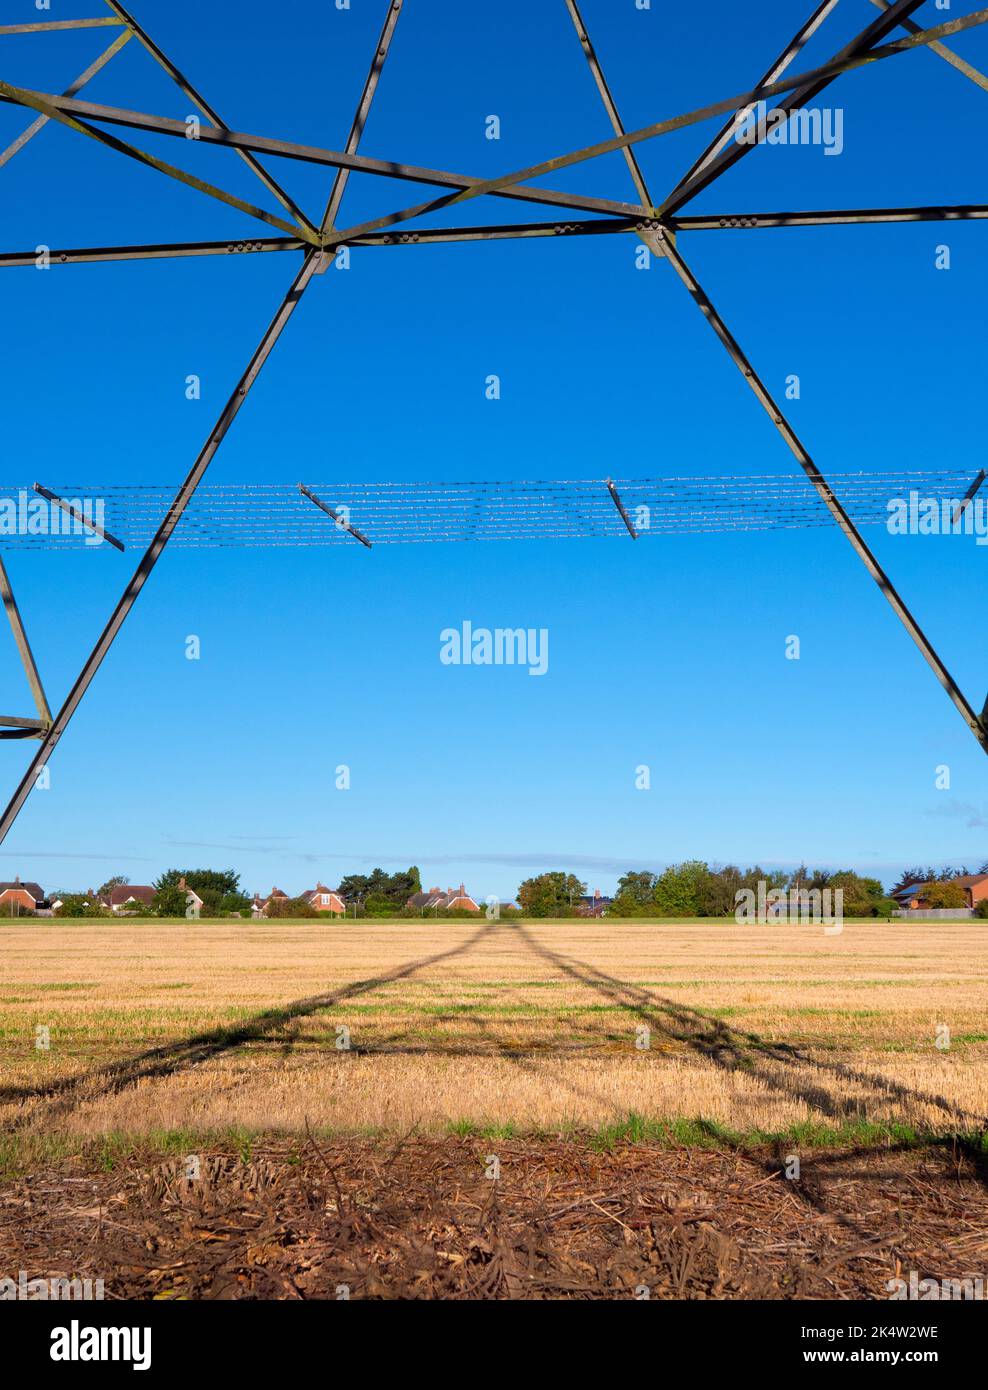 I love electricity pylons; I find their abstract, gaunt shapes endlessly fascinating. Here we see shadows cast by a large pylon in a field in rural Ra Stock Photo